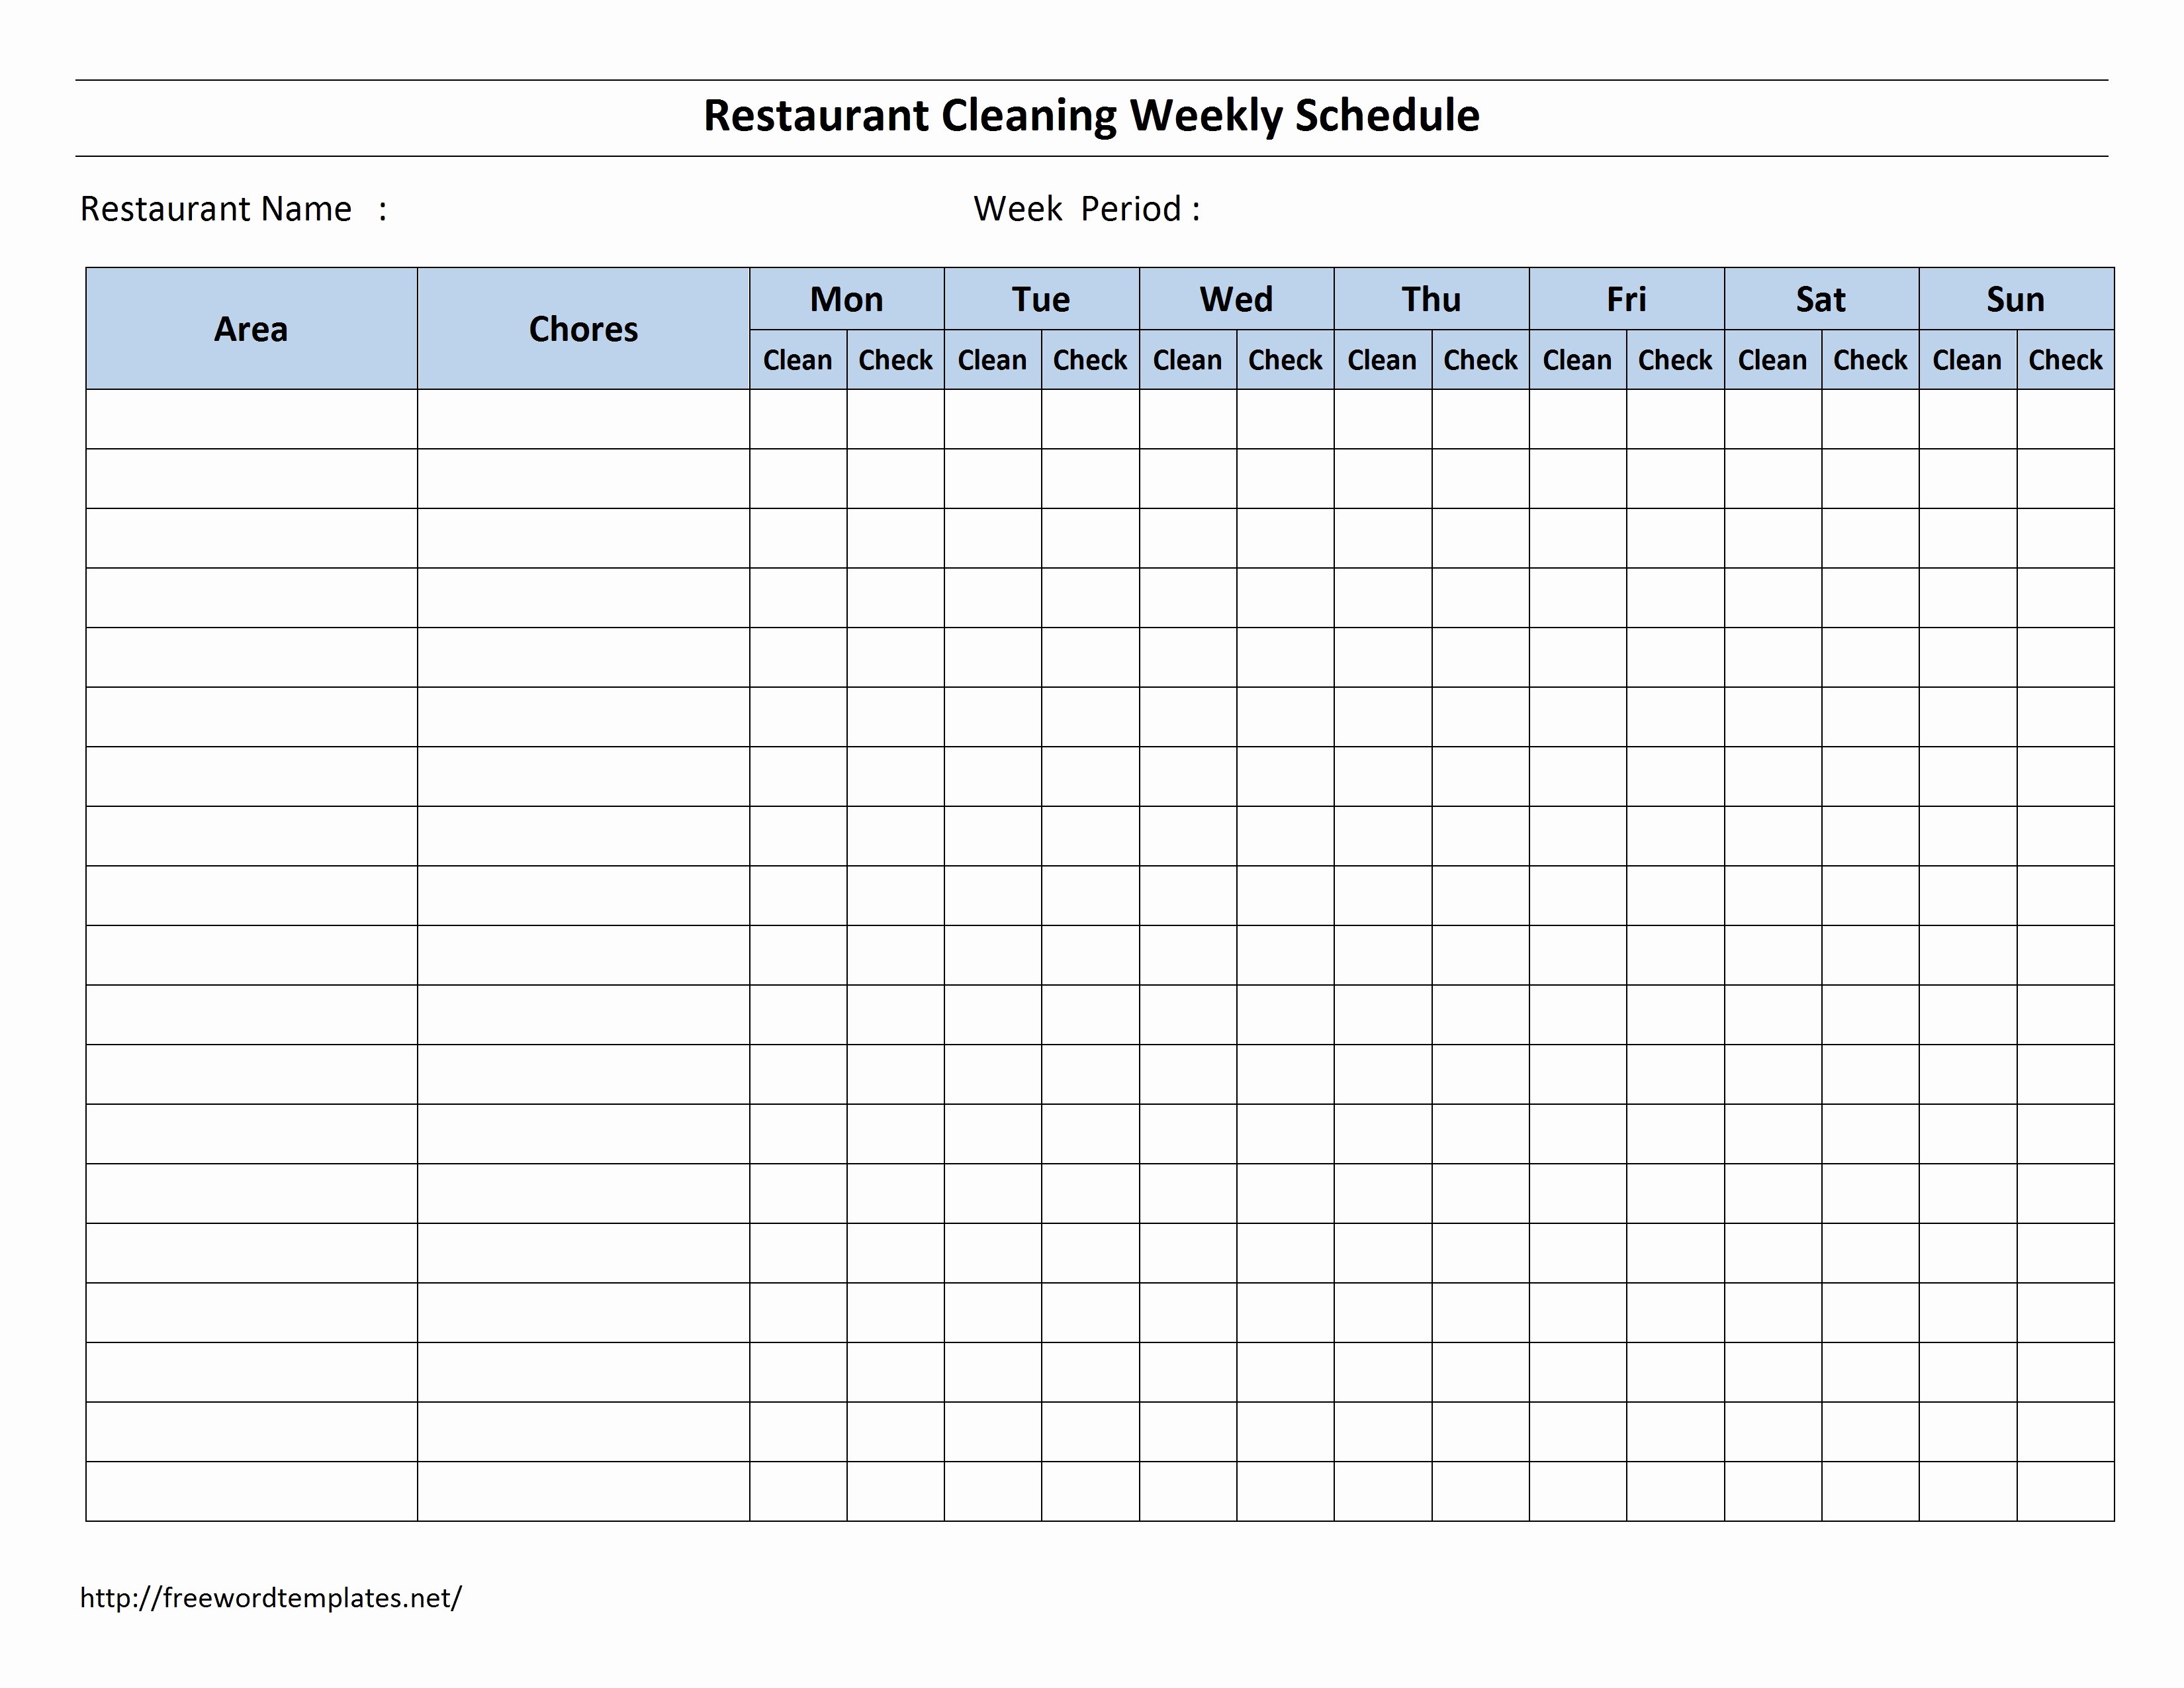 Bathroom Cleaning Schedule Template Awesome Hotel Room Cleaning Schedule Template